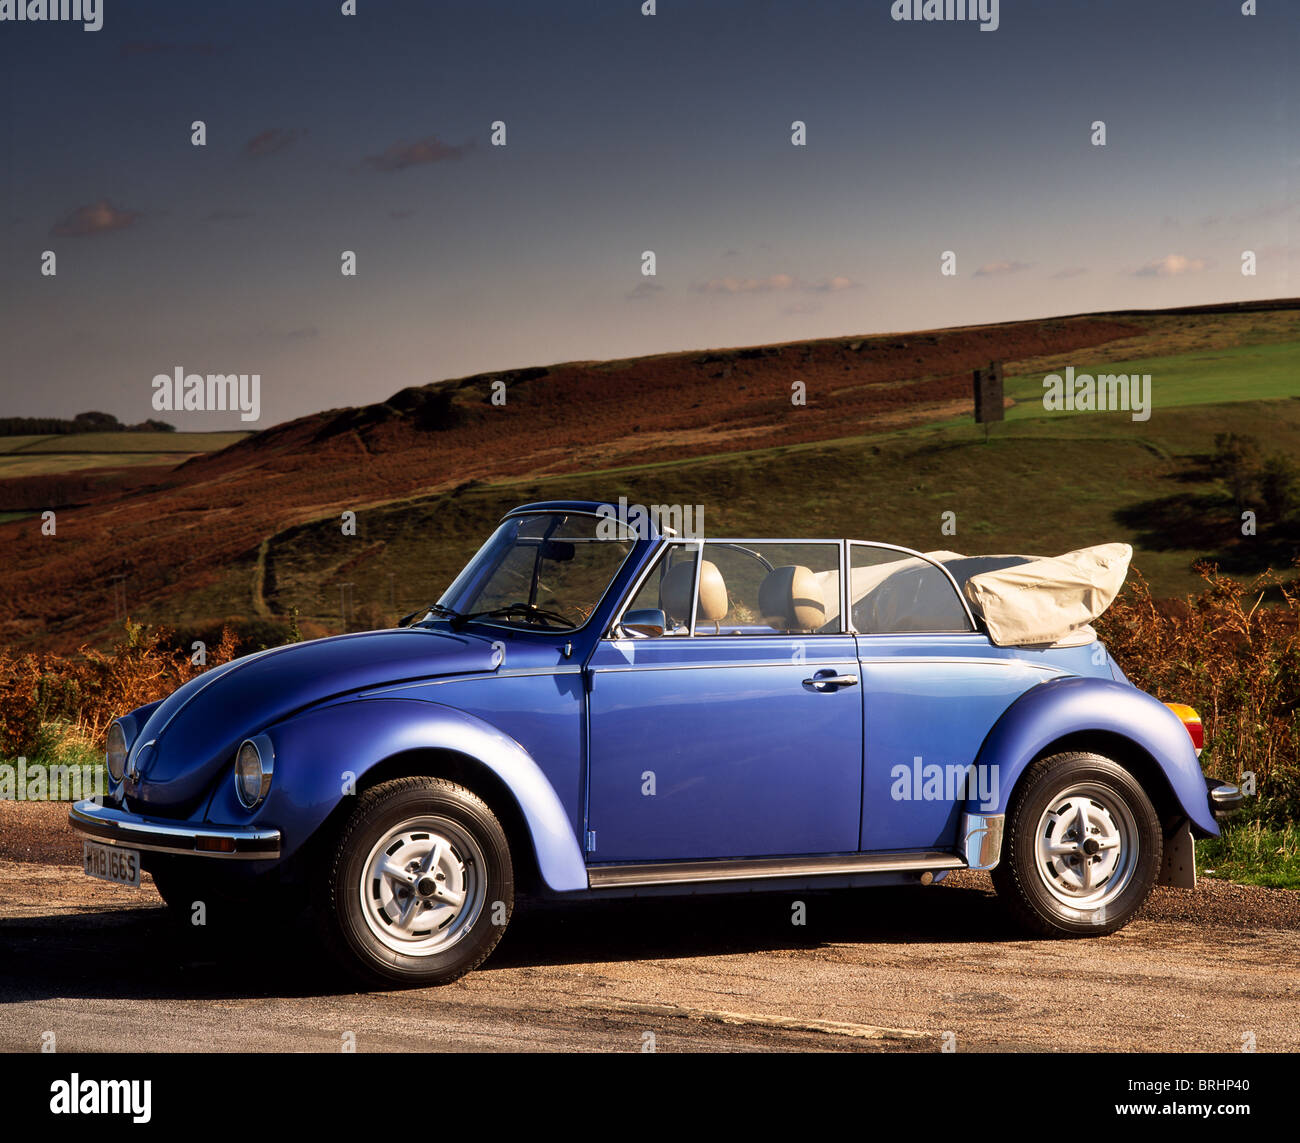 1975 VW Beetle 1303 Cabriolet parked on country road, front view, roof down Stock Photo